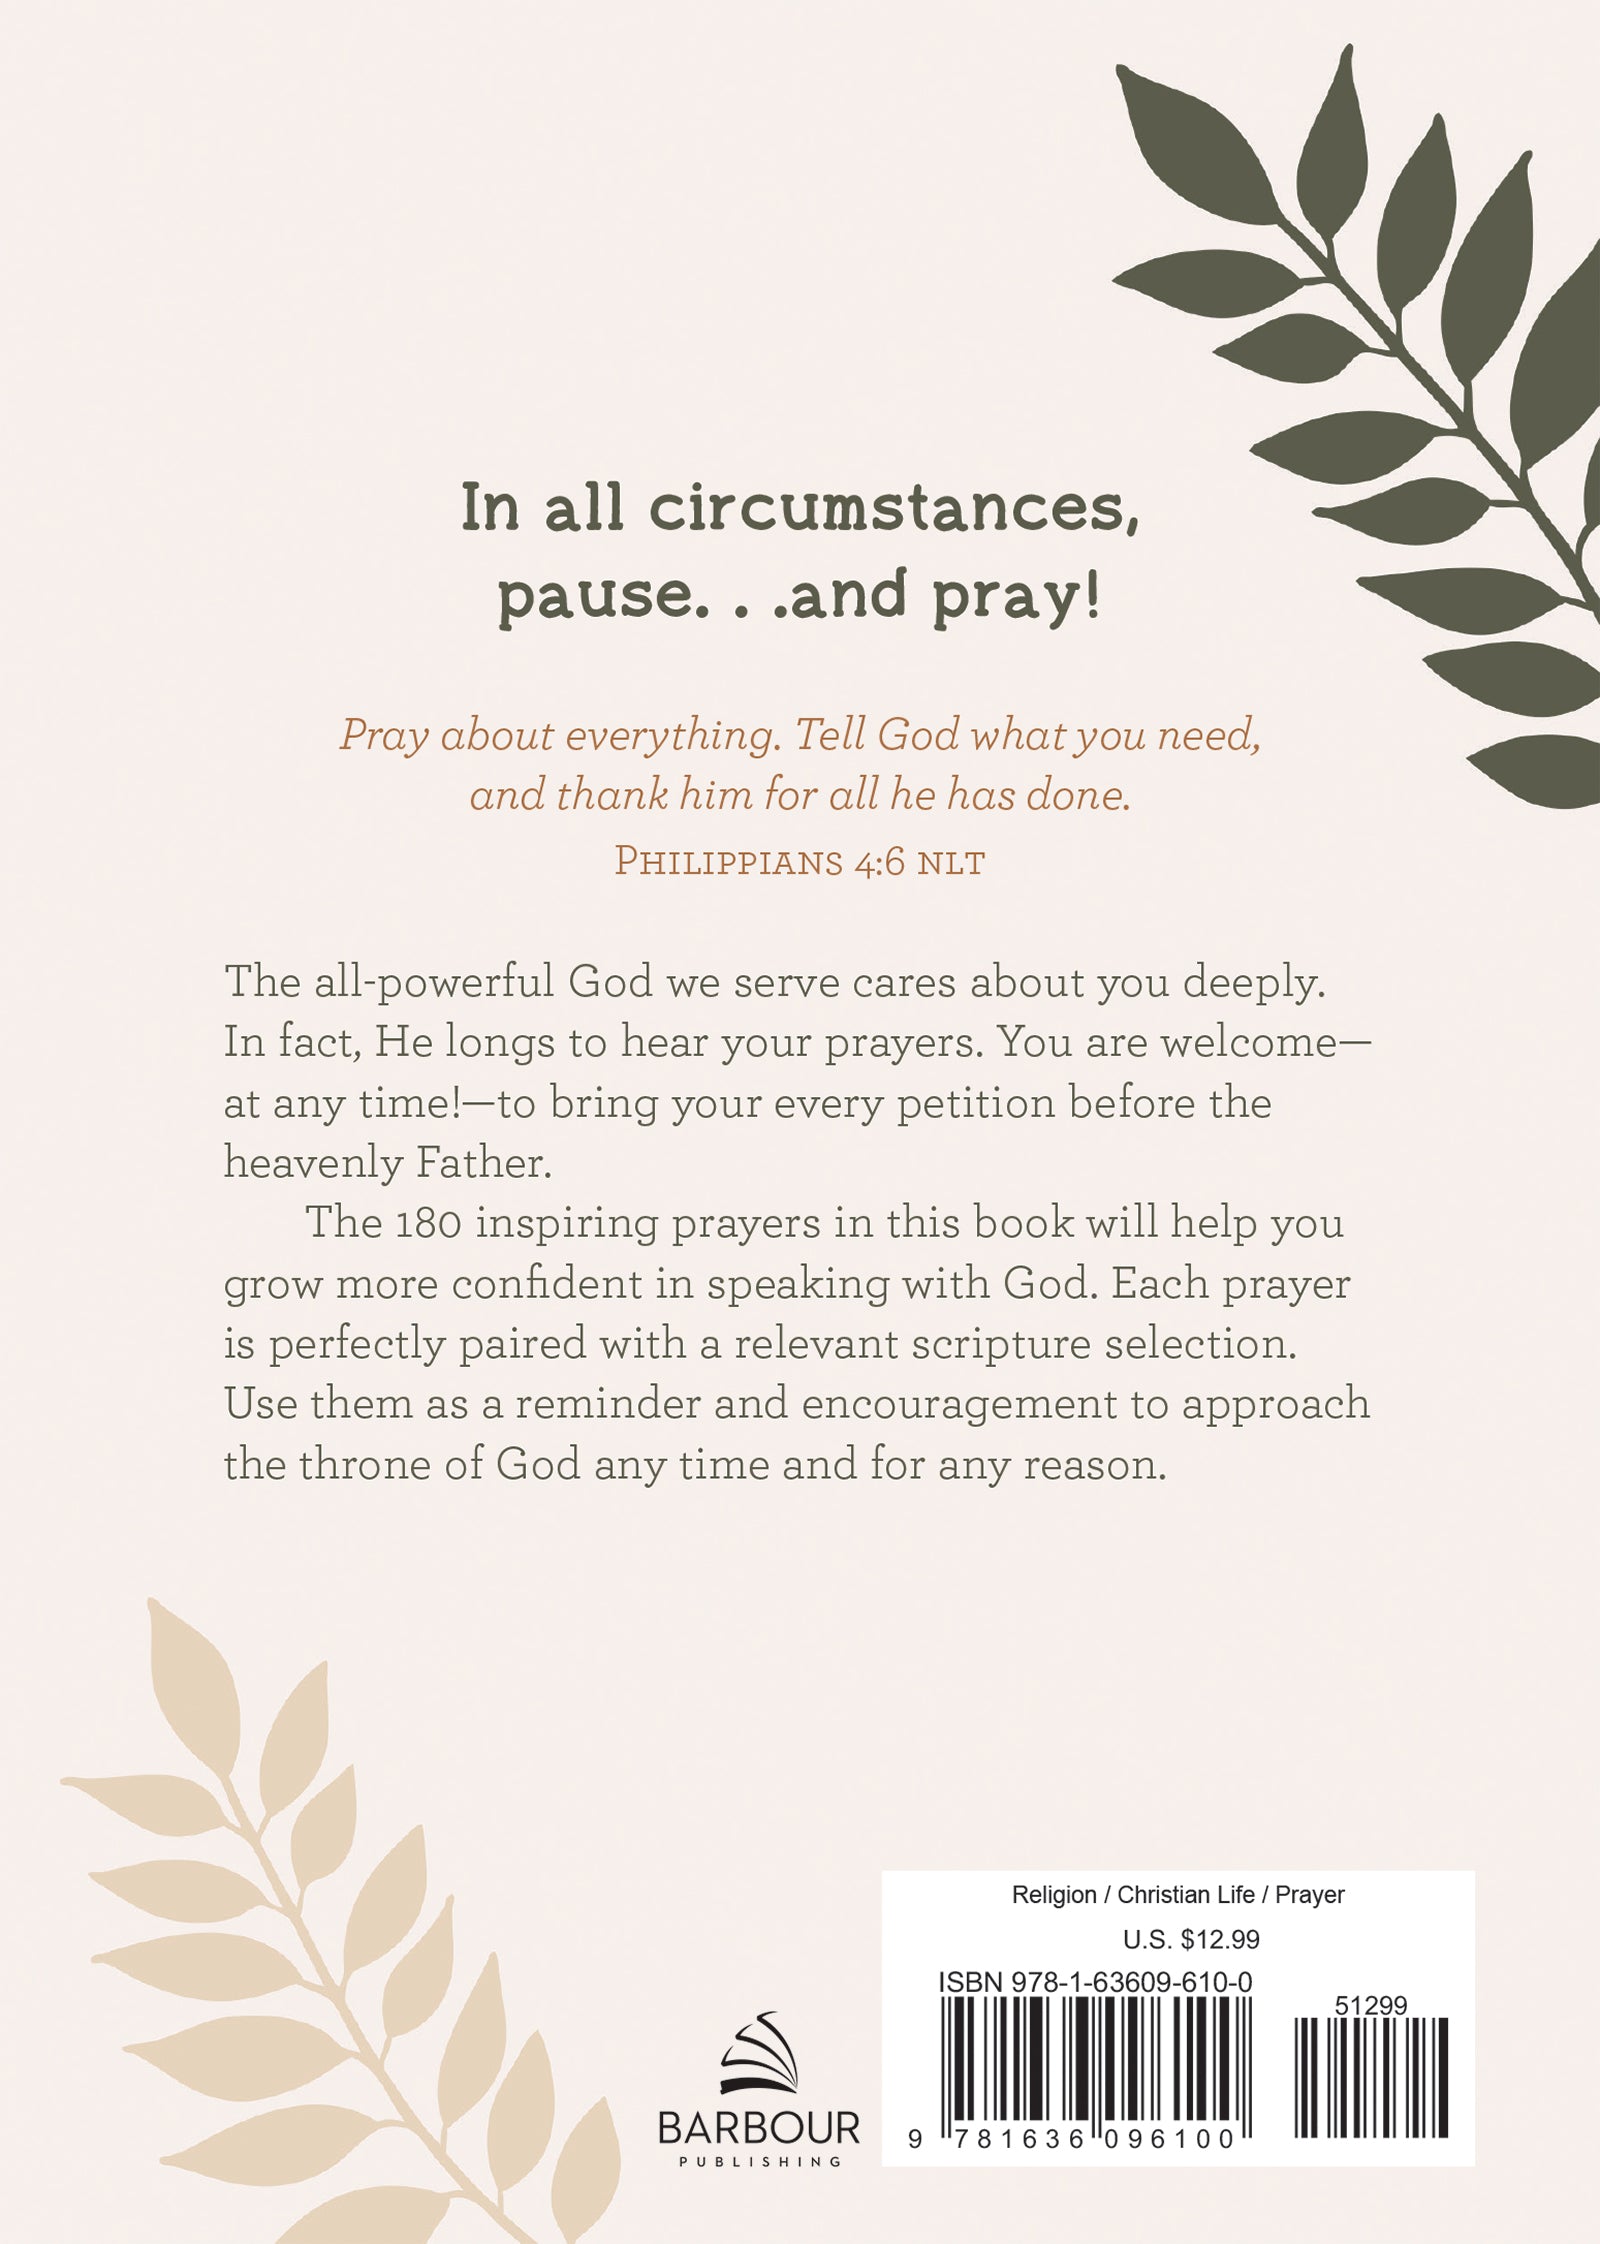 Pause and Pray - The Christian Gift Company